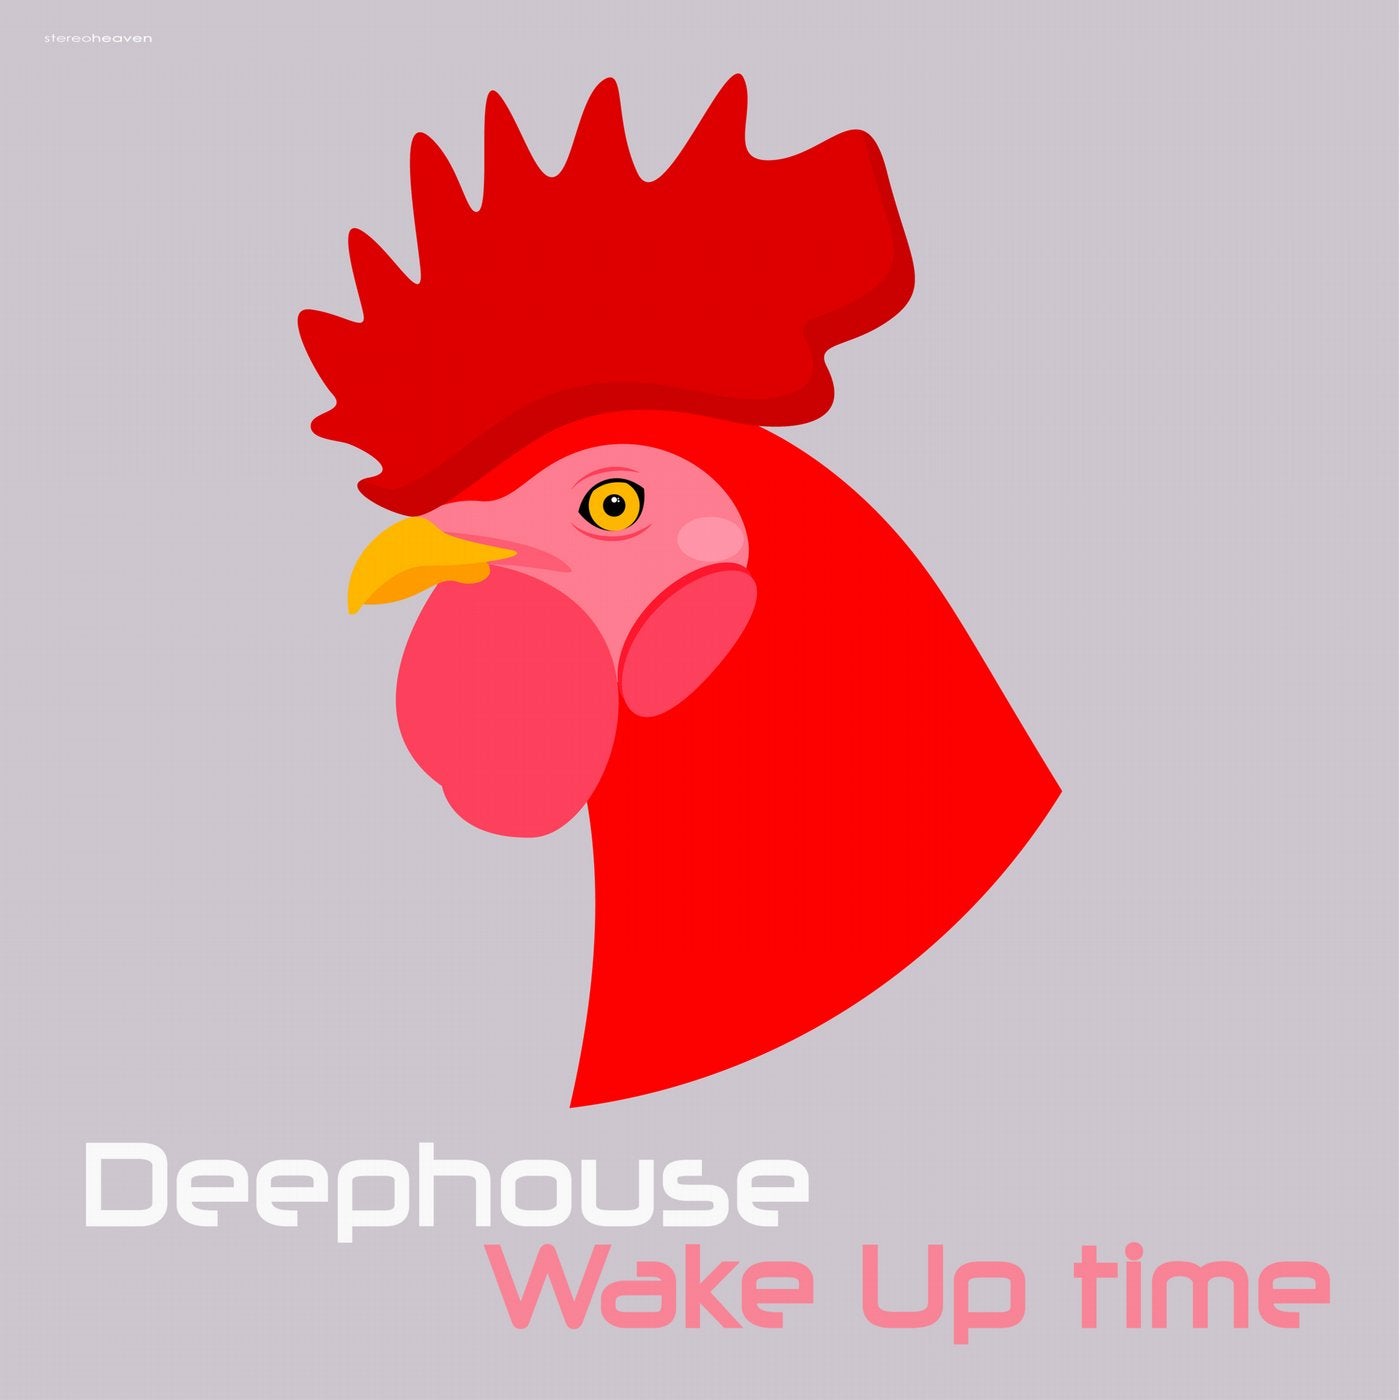 Deephouse Wake Up Time